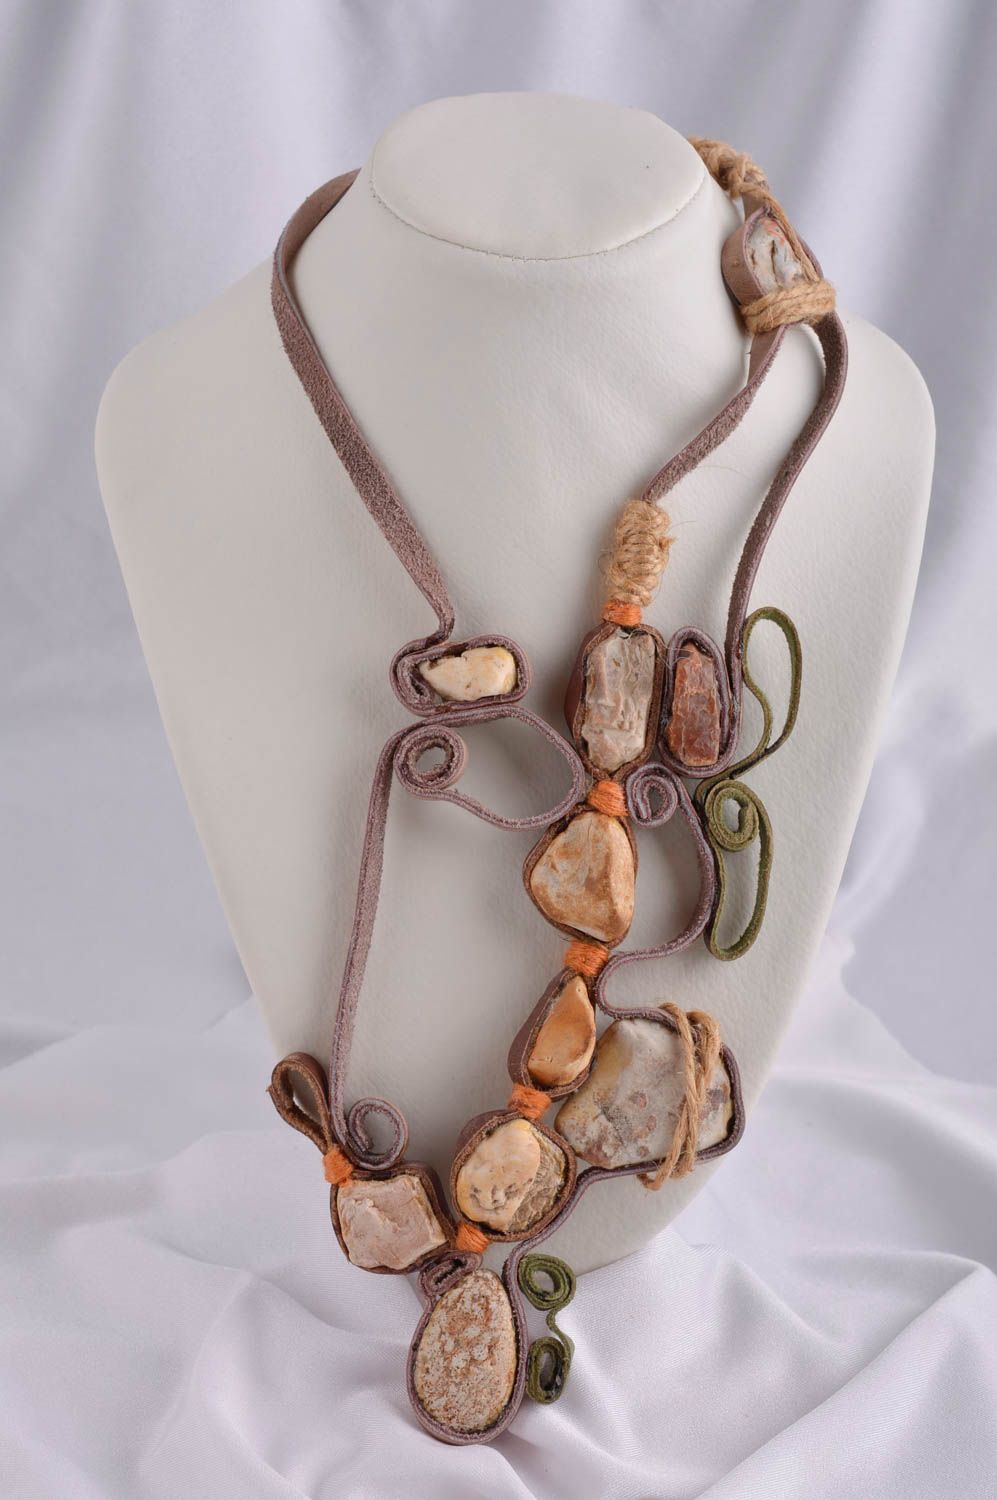 Designer necklace with natural stones leather jewelry handmade accessories photo 1